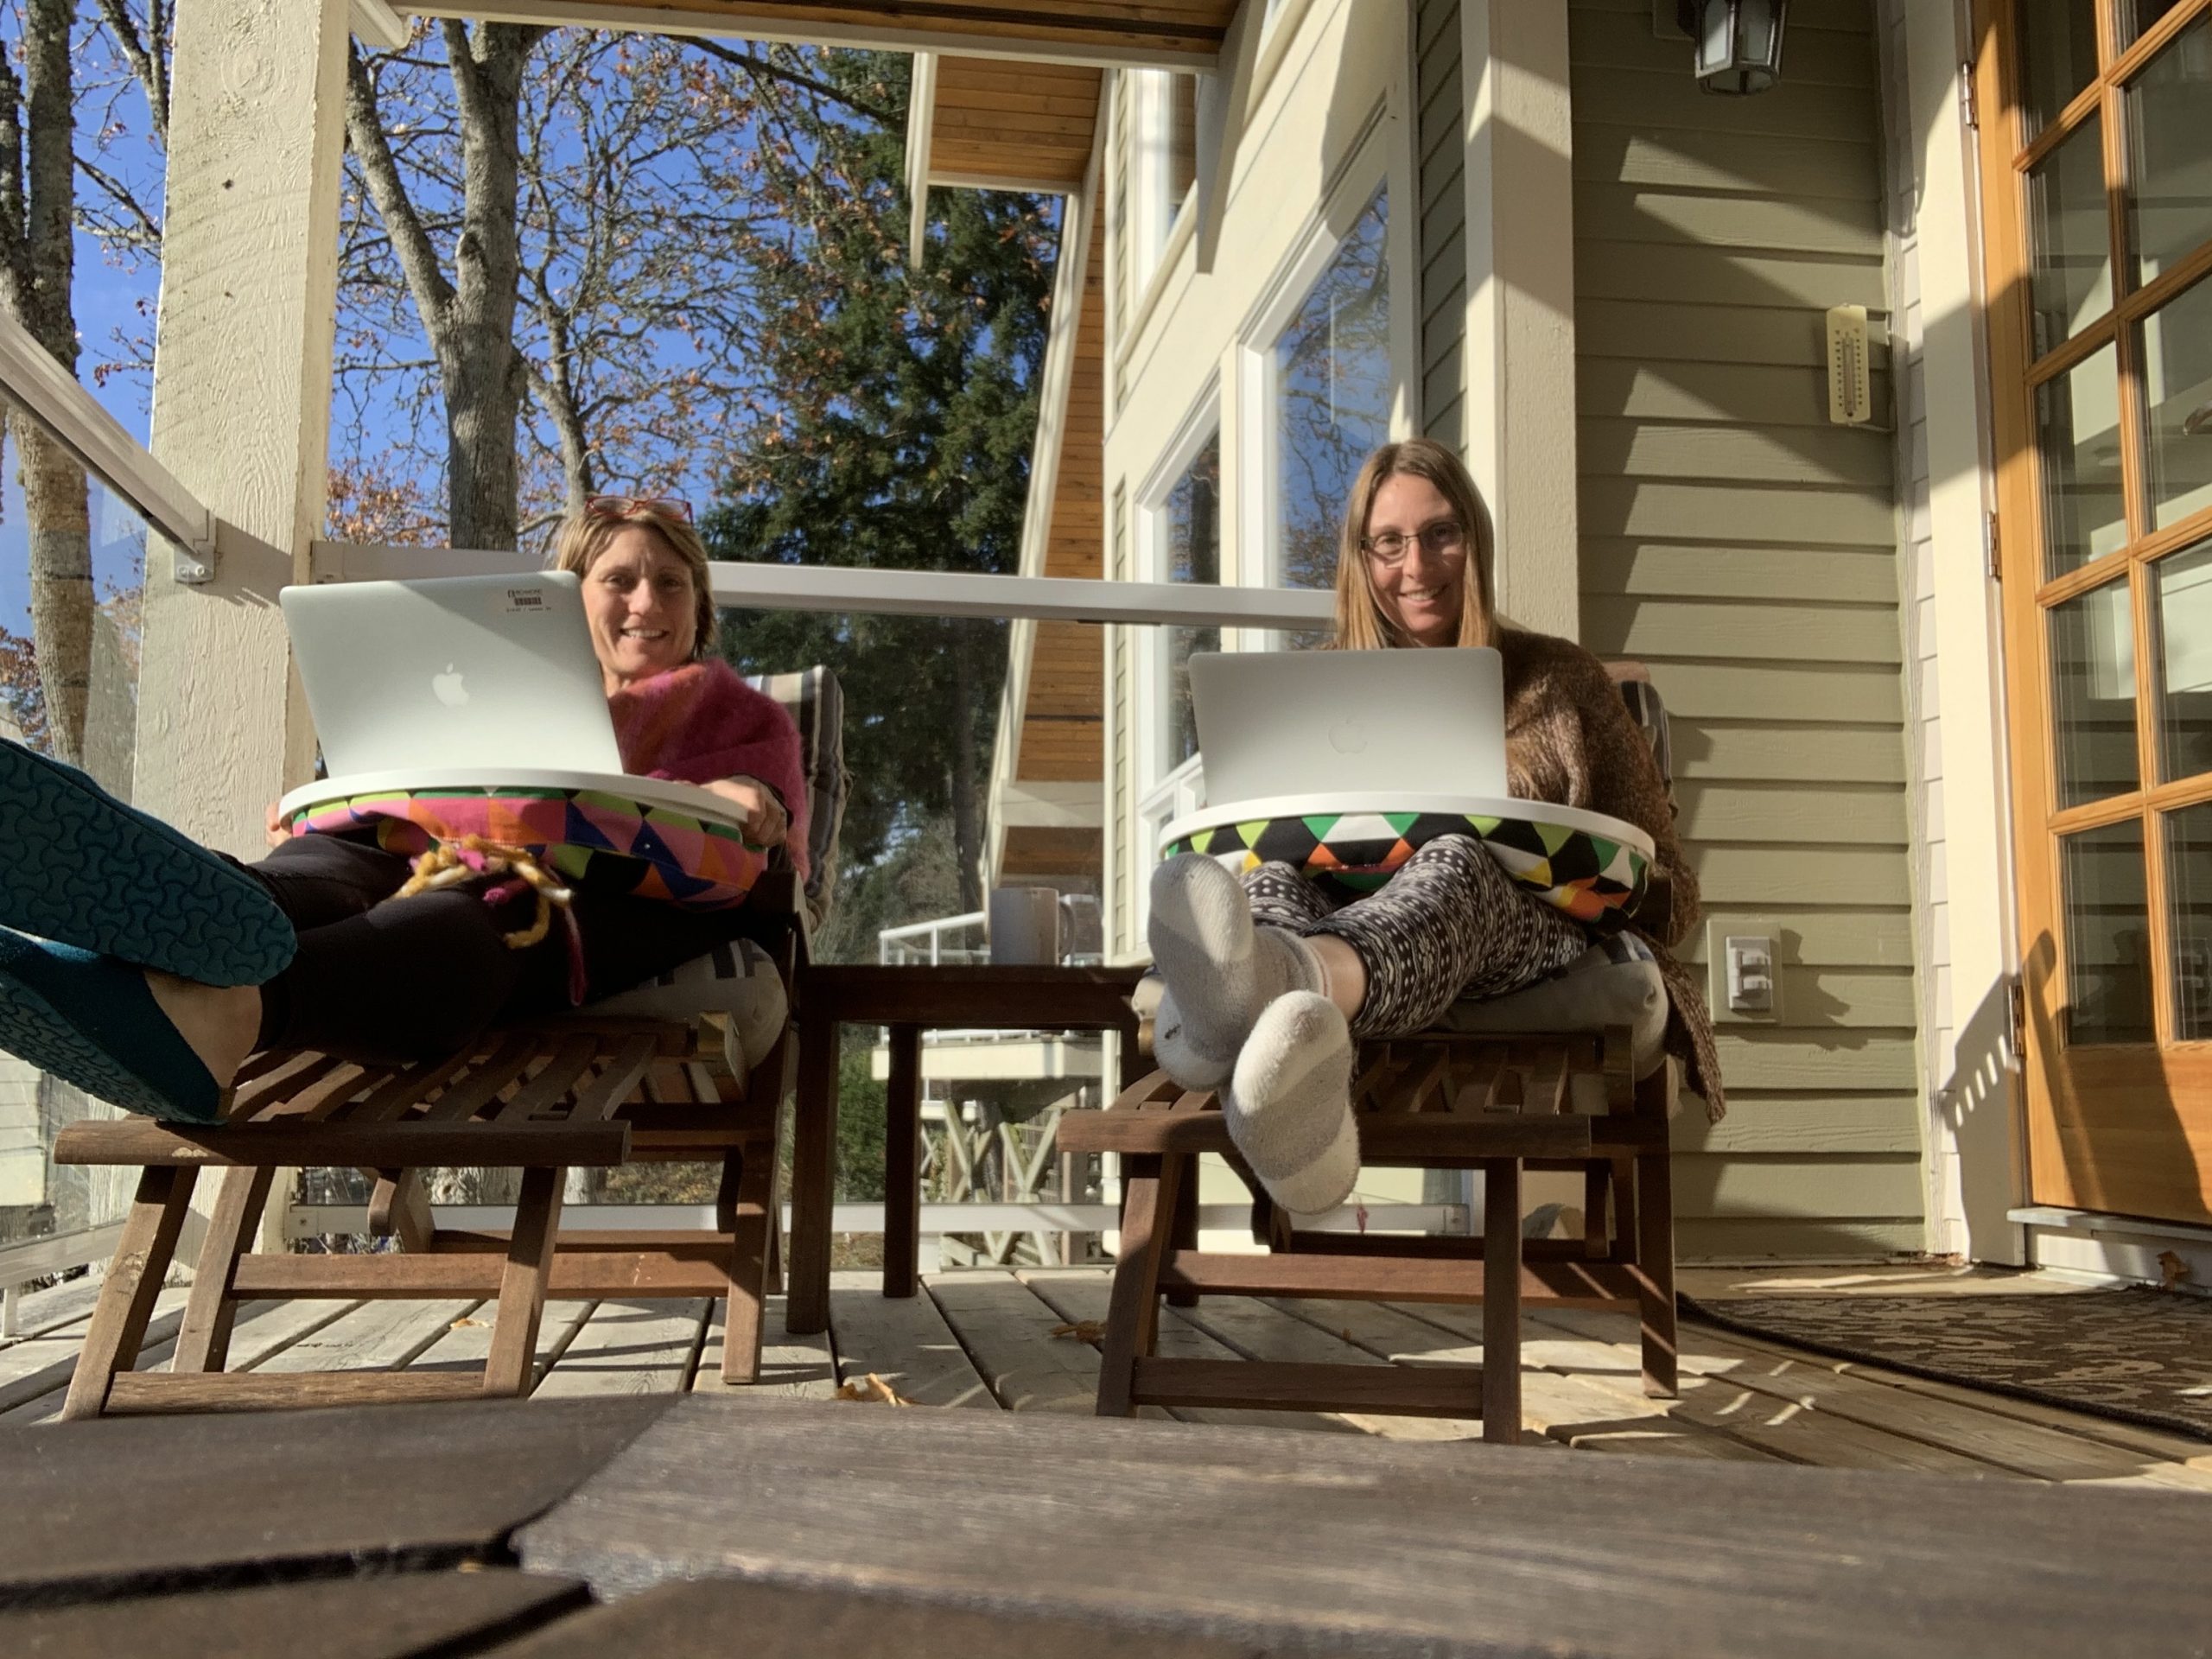 Elspeth and Rowena sitting in lounge chairs on the deck, both typing on laptops